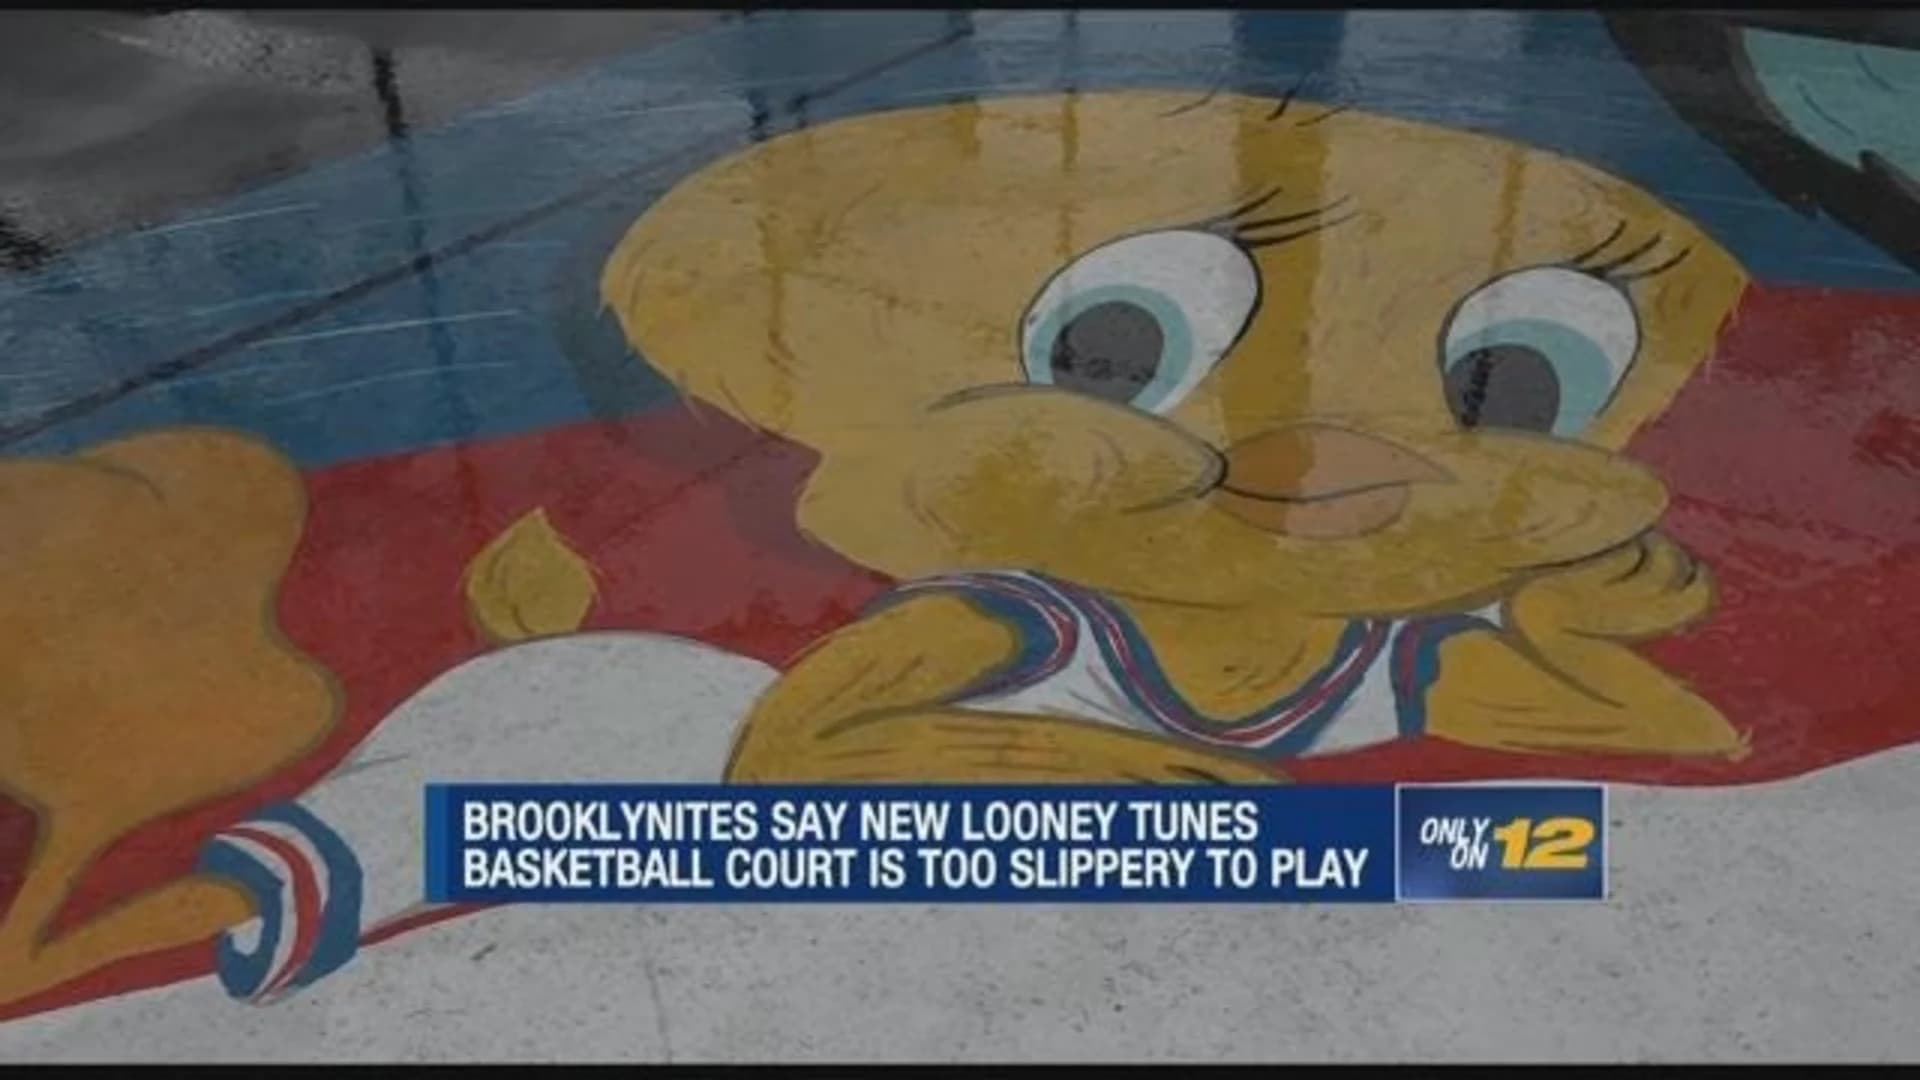 'Looney Tunes' basketball court draws ire due to slippery surface